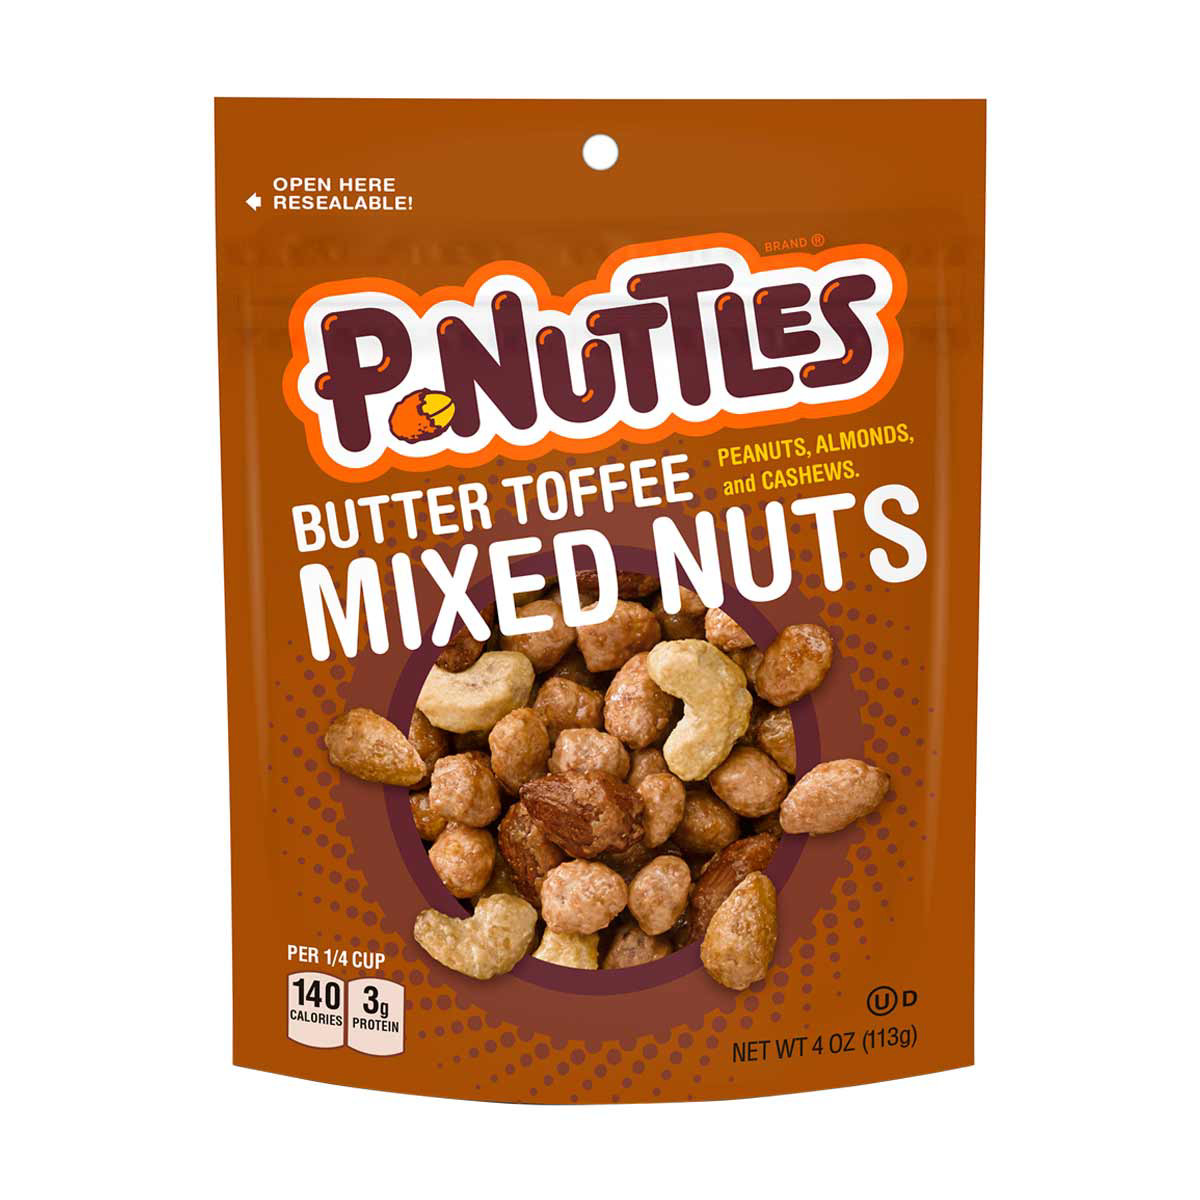 P-Nuttles Butter Toffee Mixed Nuts Snack, 4 oz.